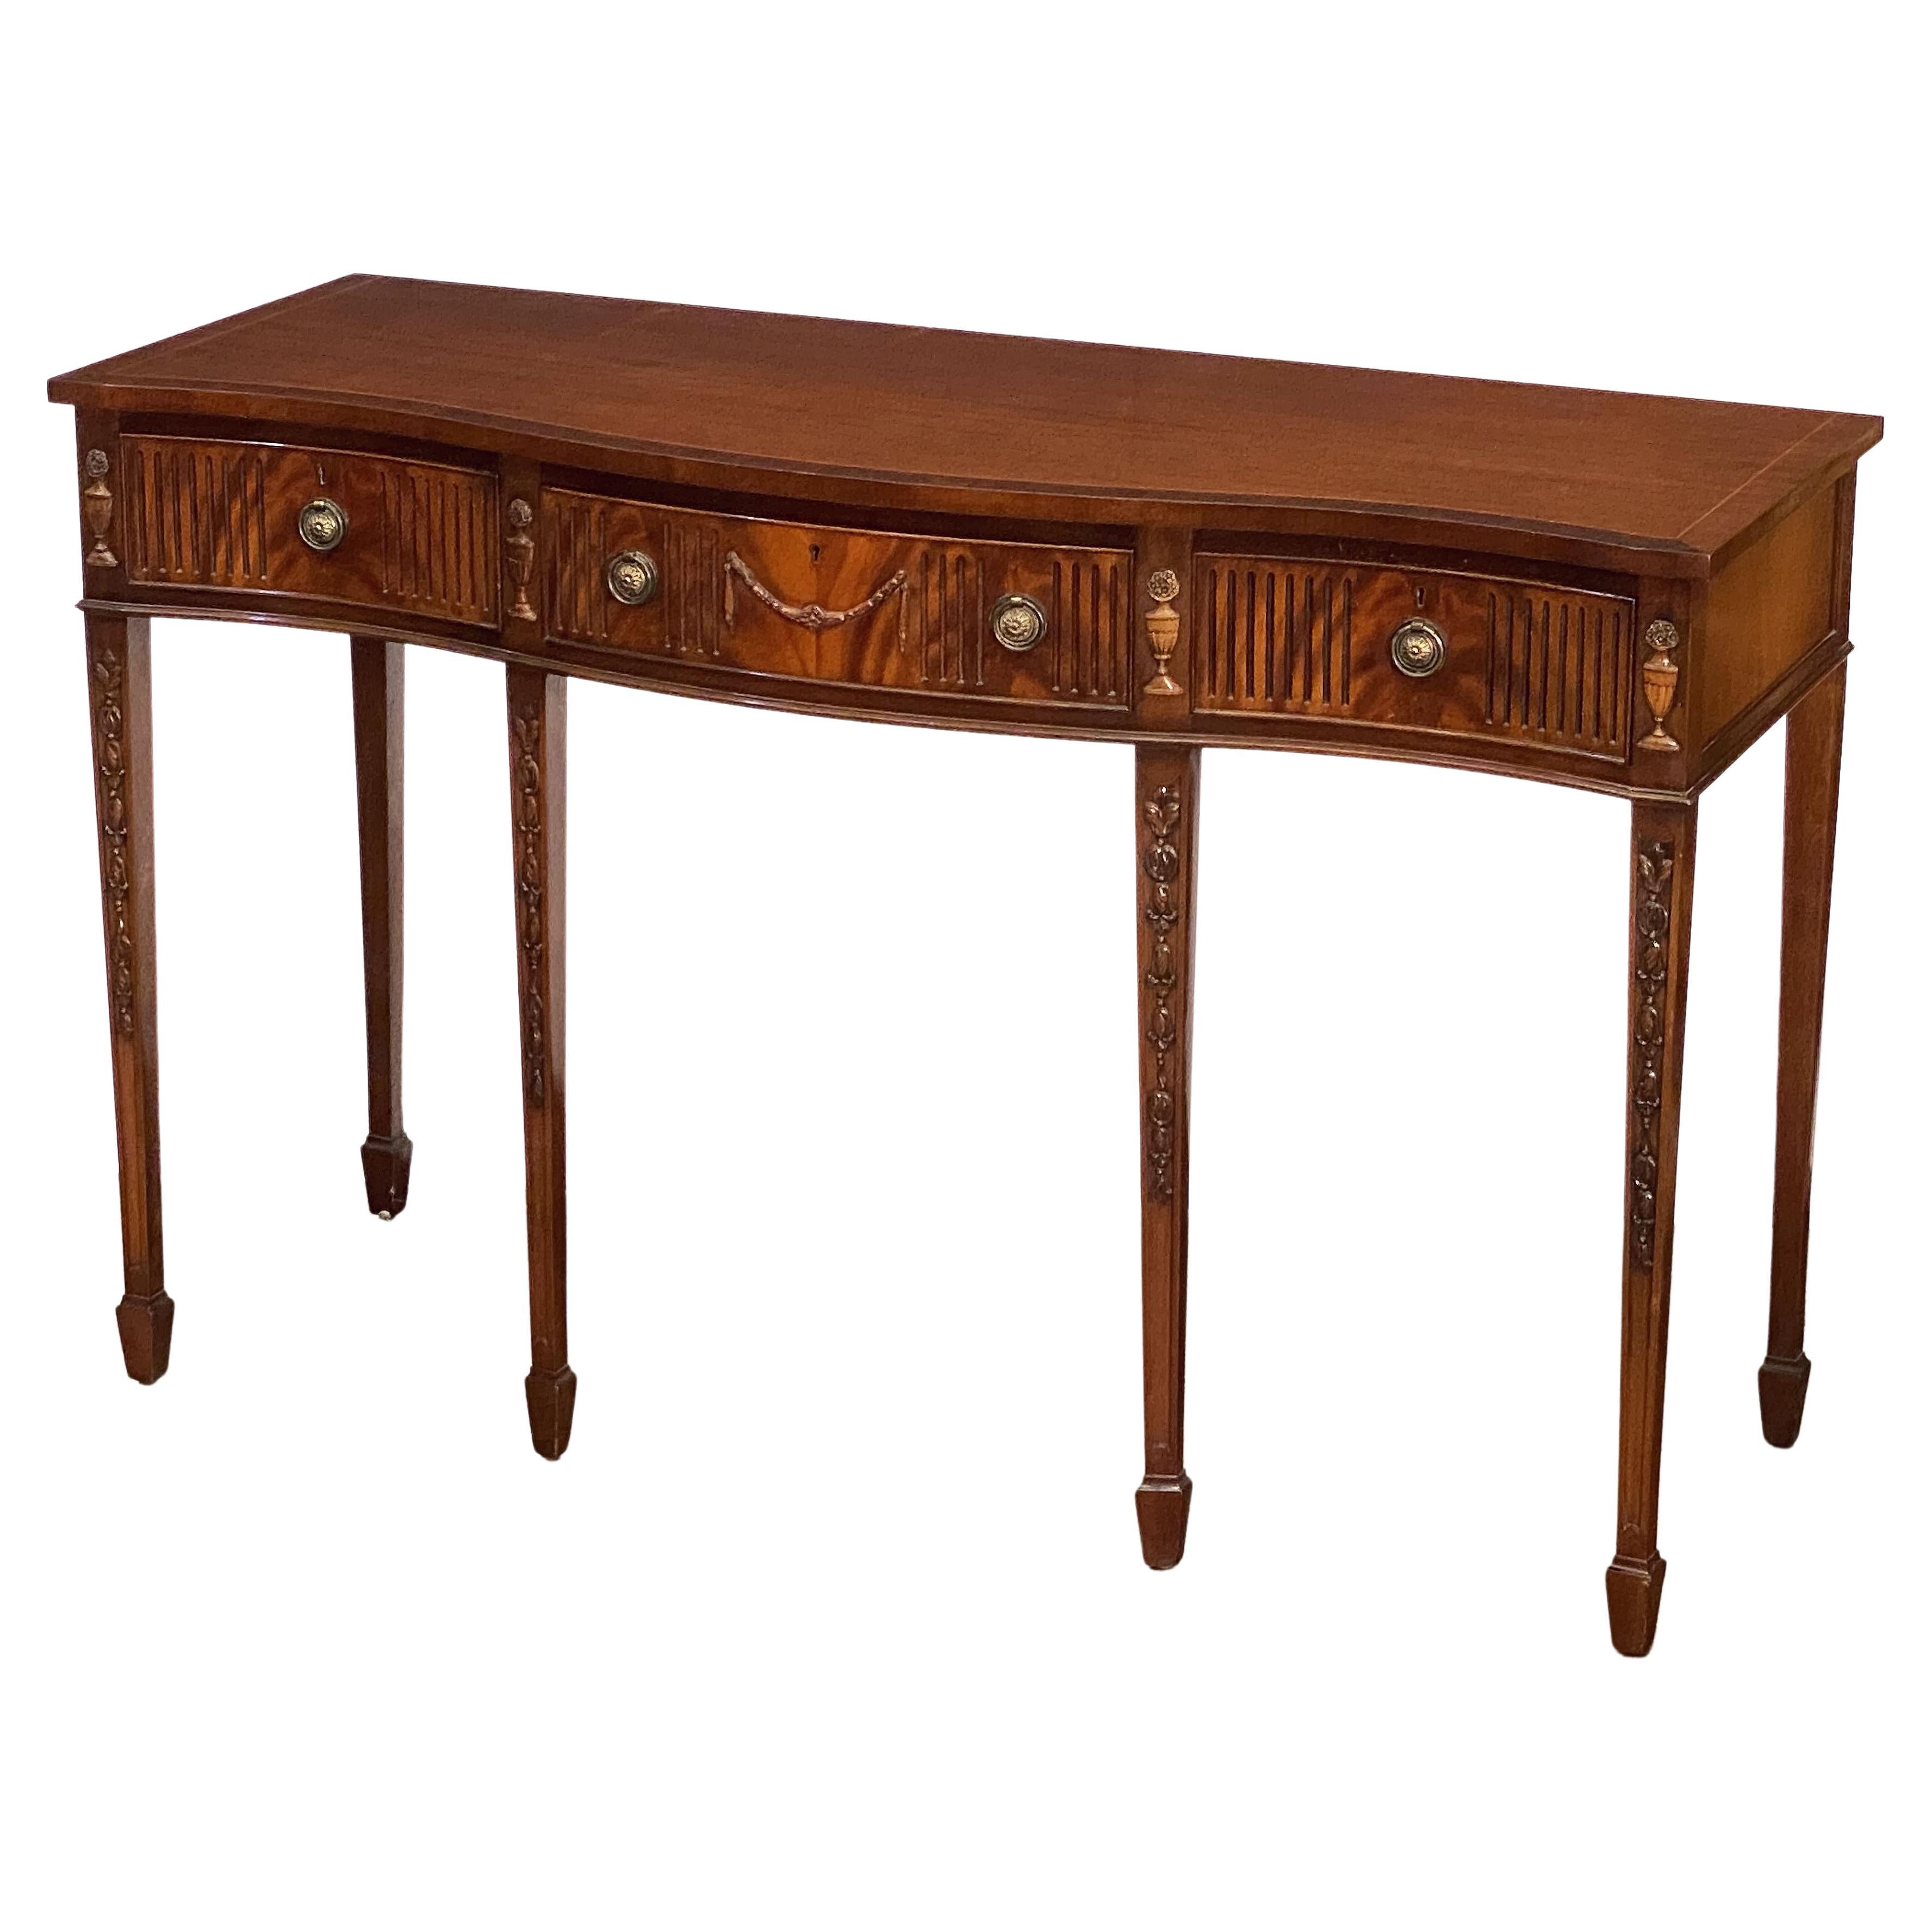 English Console Server or Buffet Table of Mahogany in the Sheraton Style 